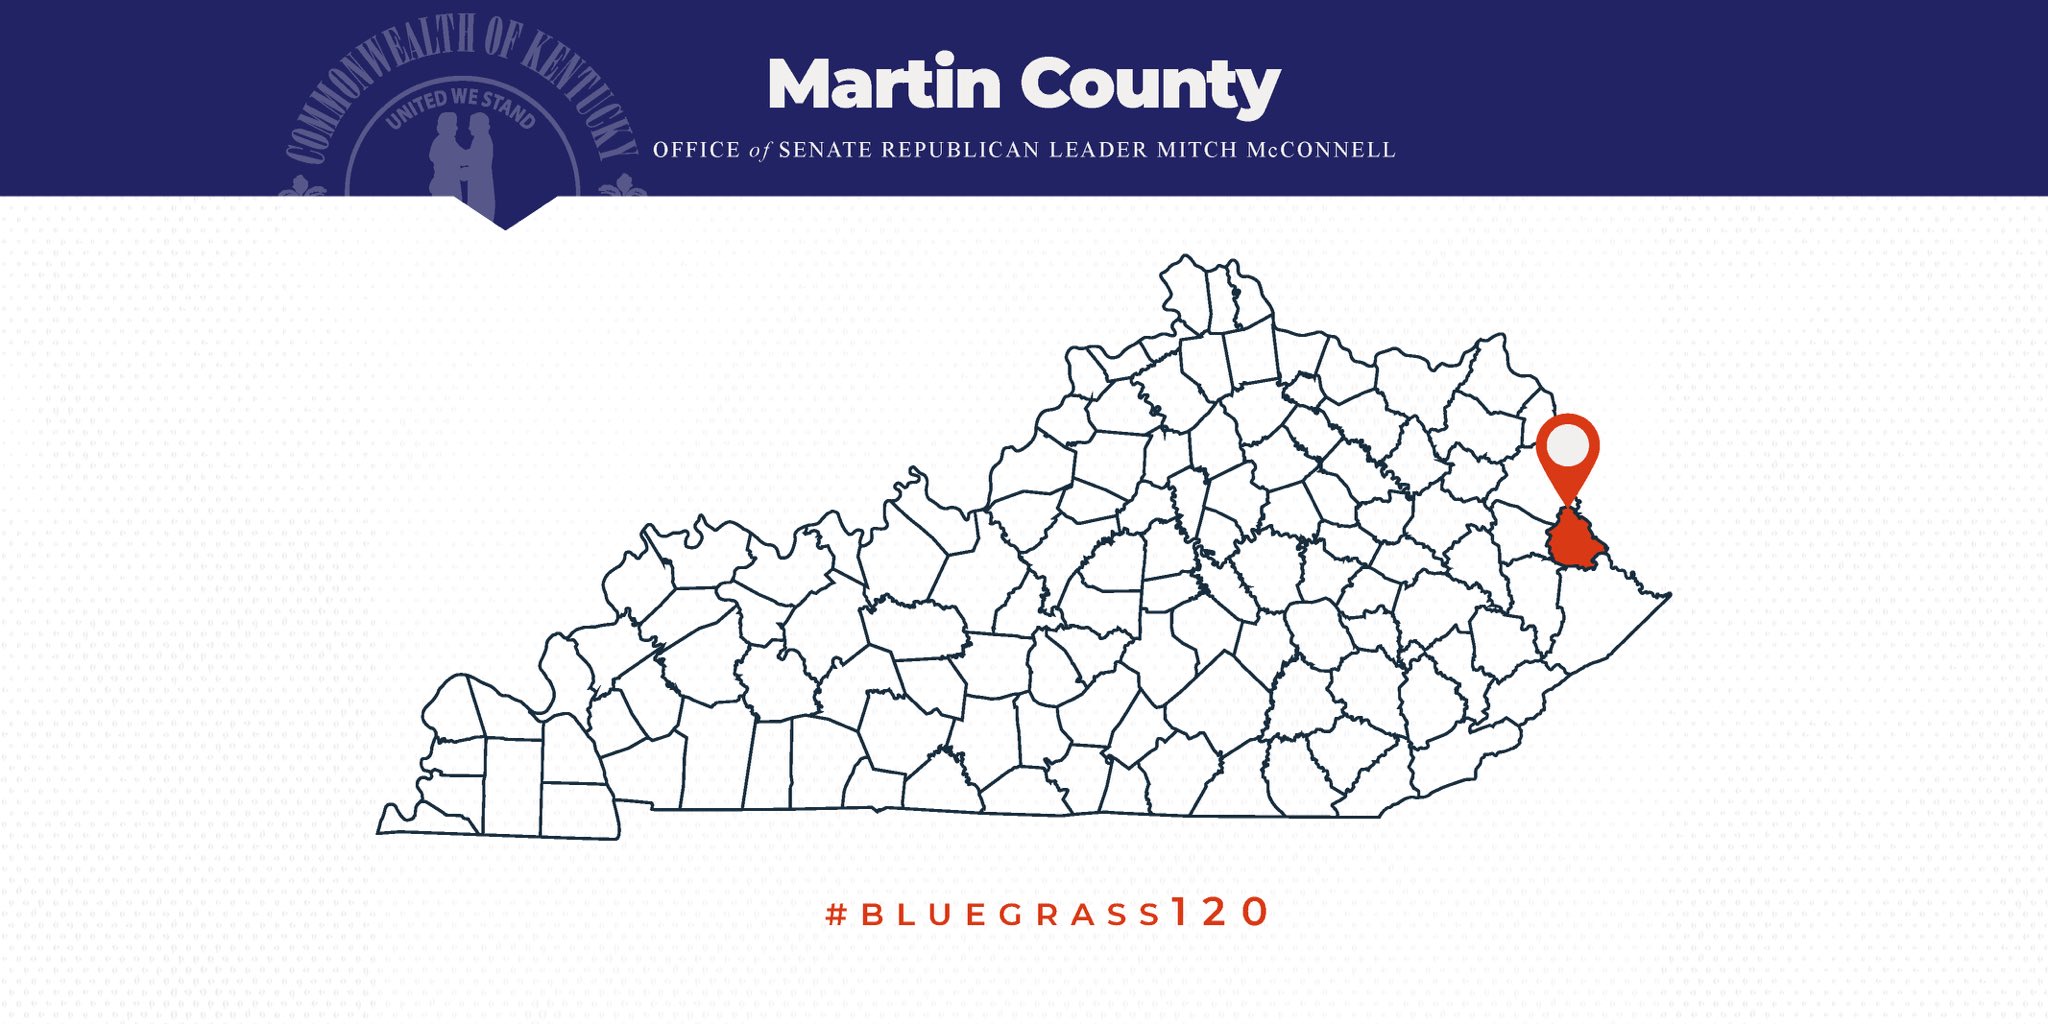 Senator Mcconnell Press For This Week S Bluegrass1 We Re E Traveling To A Place Nestled In The Beautiful Hills Of Eastern Kentucky Martin County Whose Motto Is New Commitments For A New